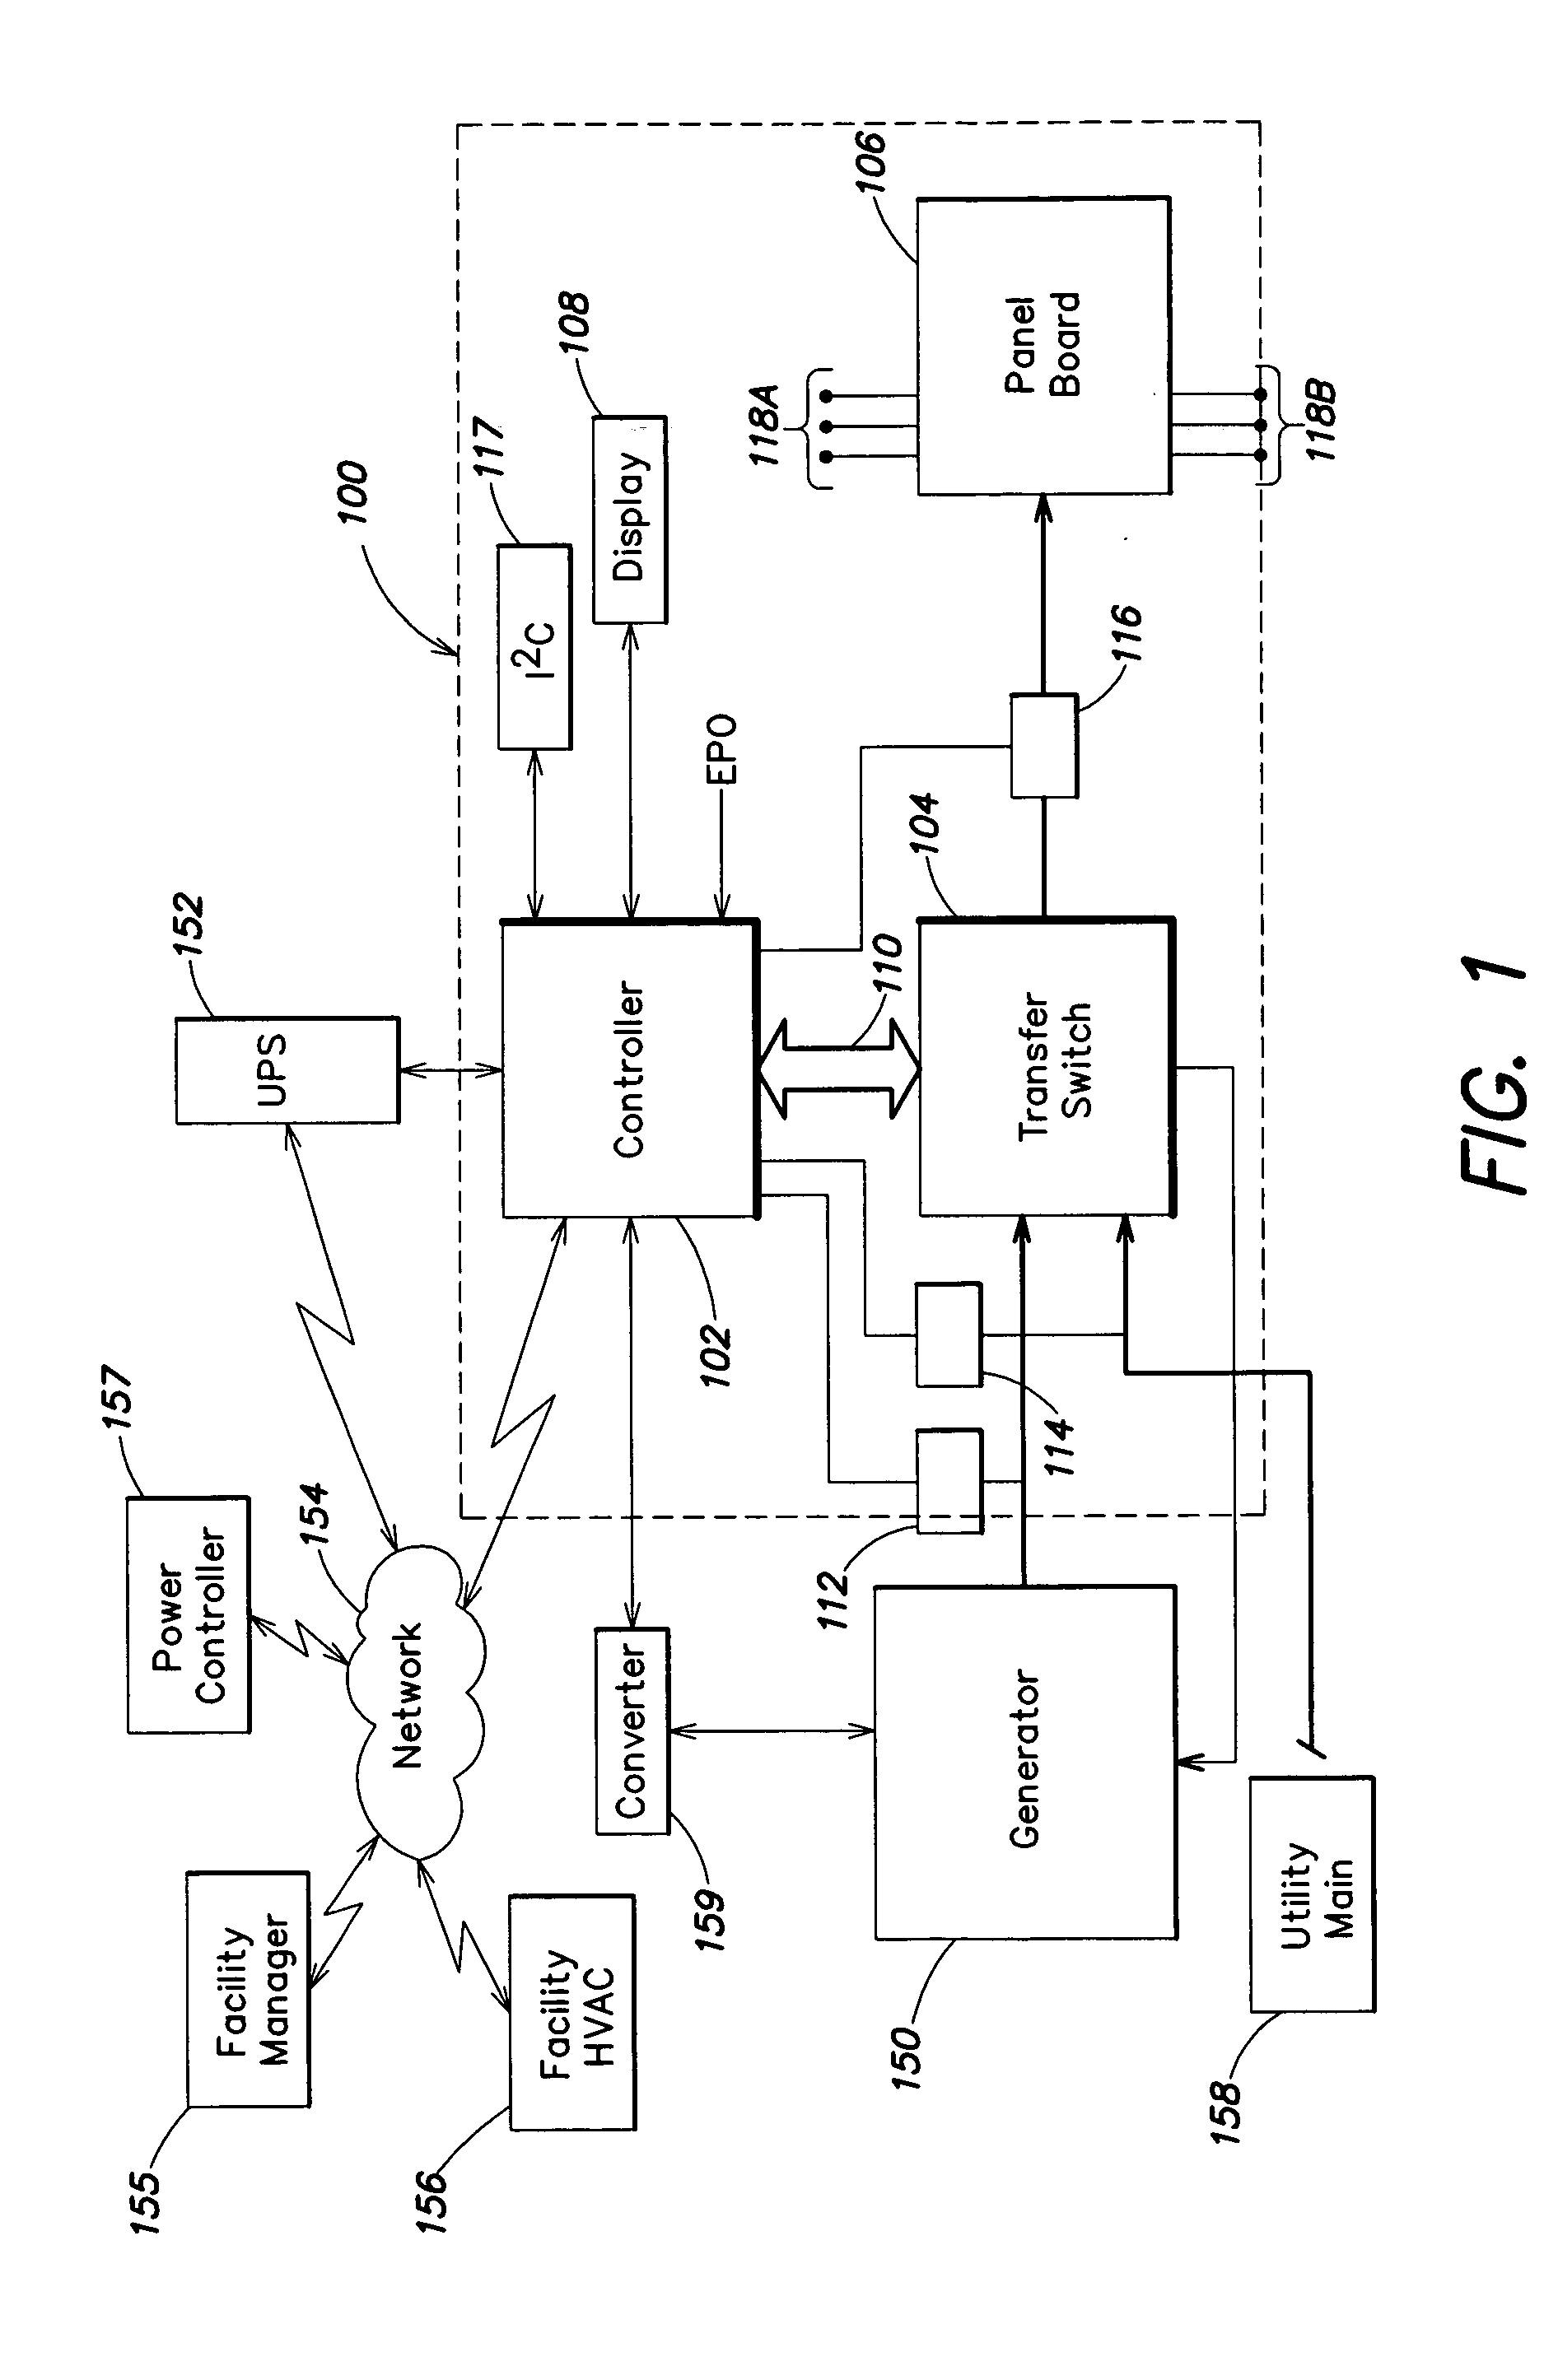 Methods and apparatus for providing and distributing standby power